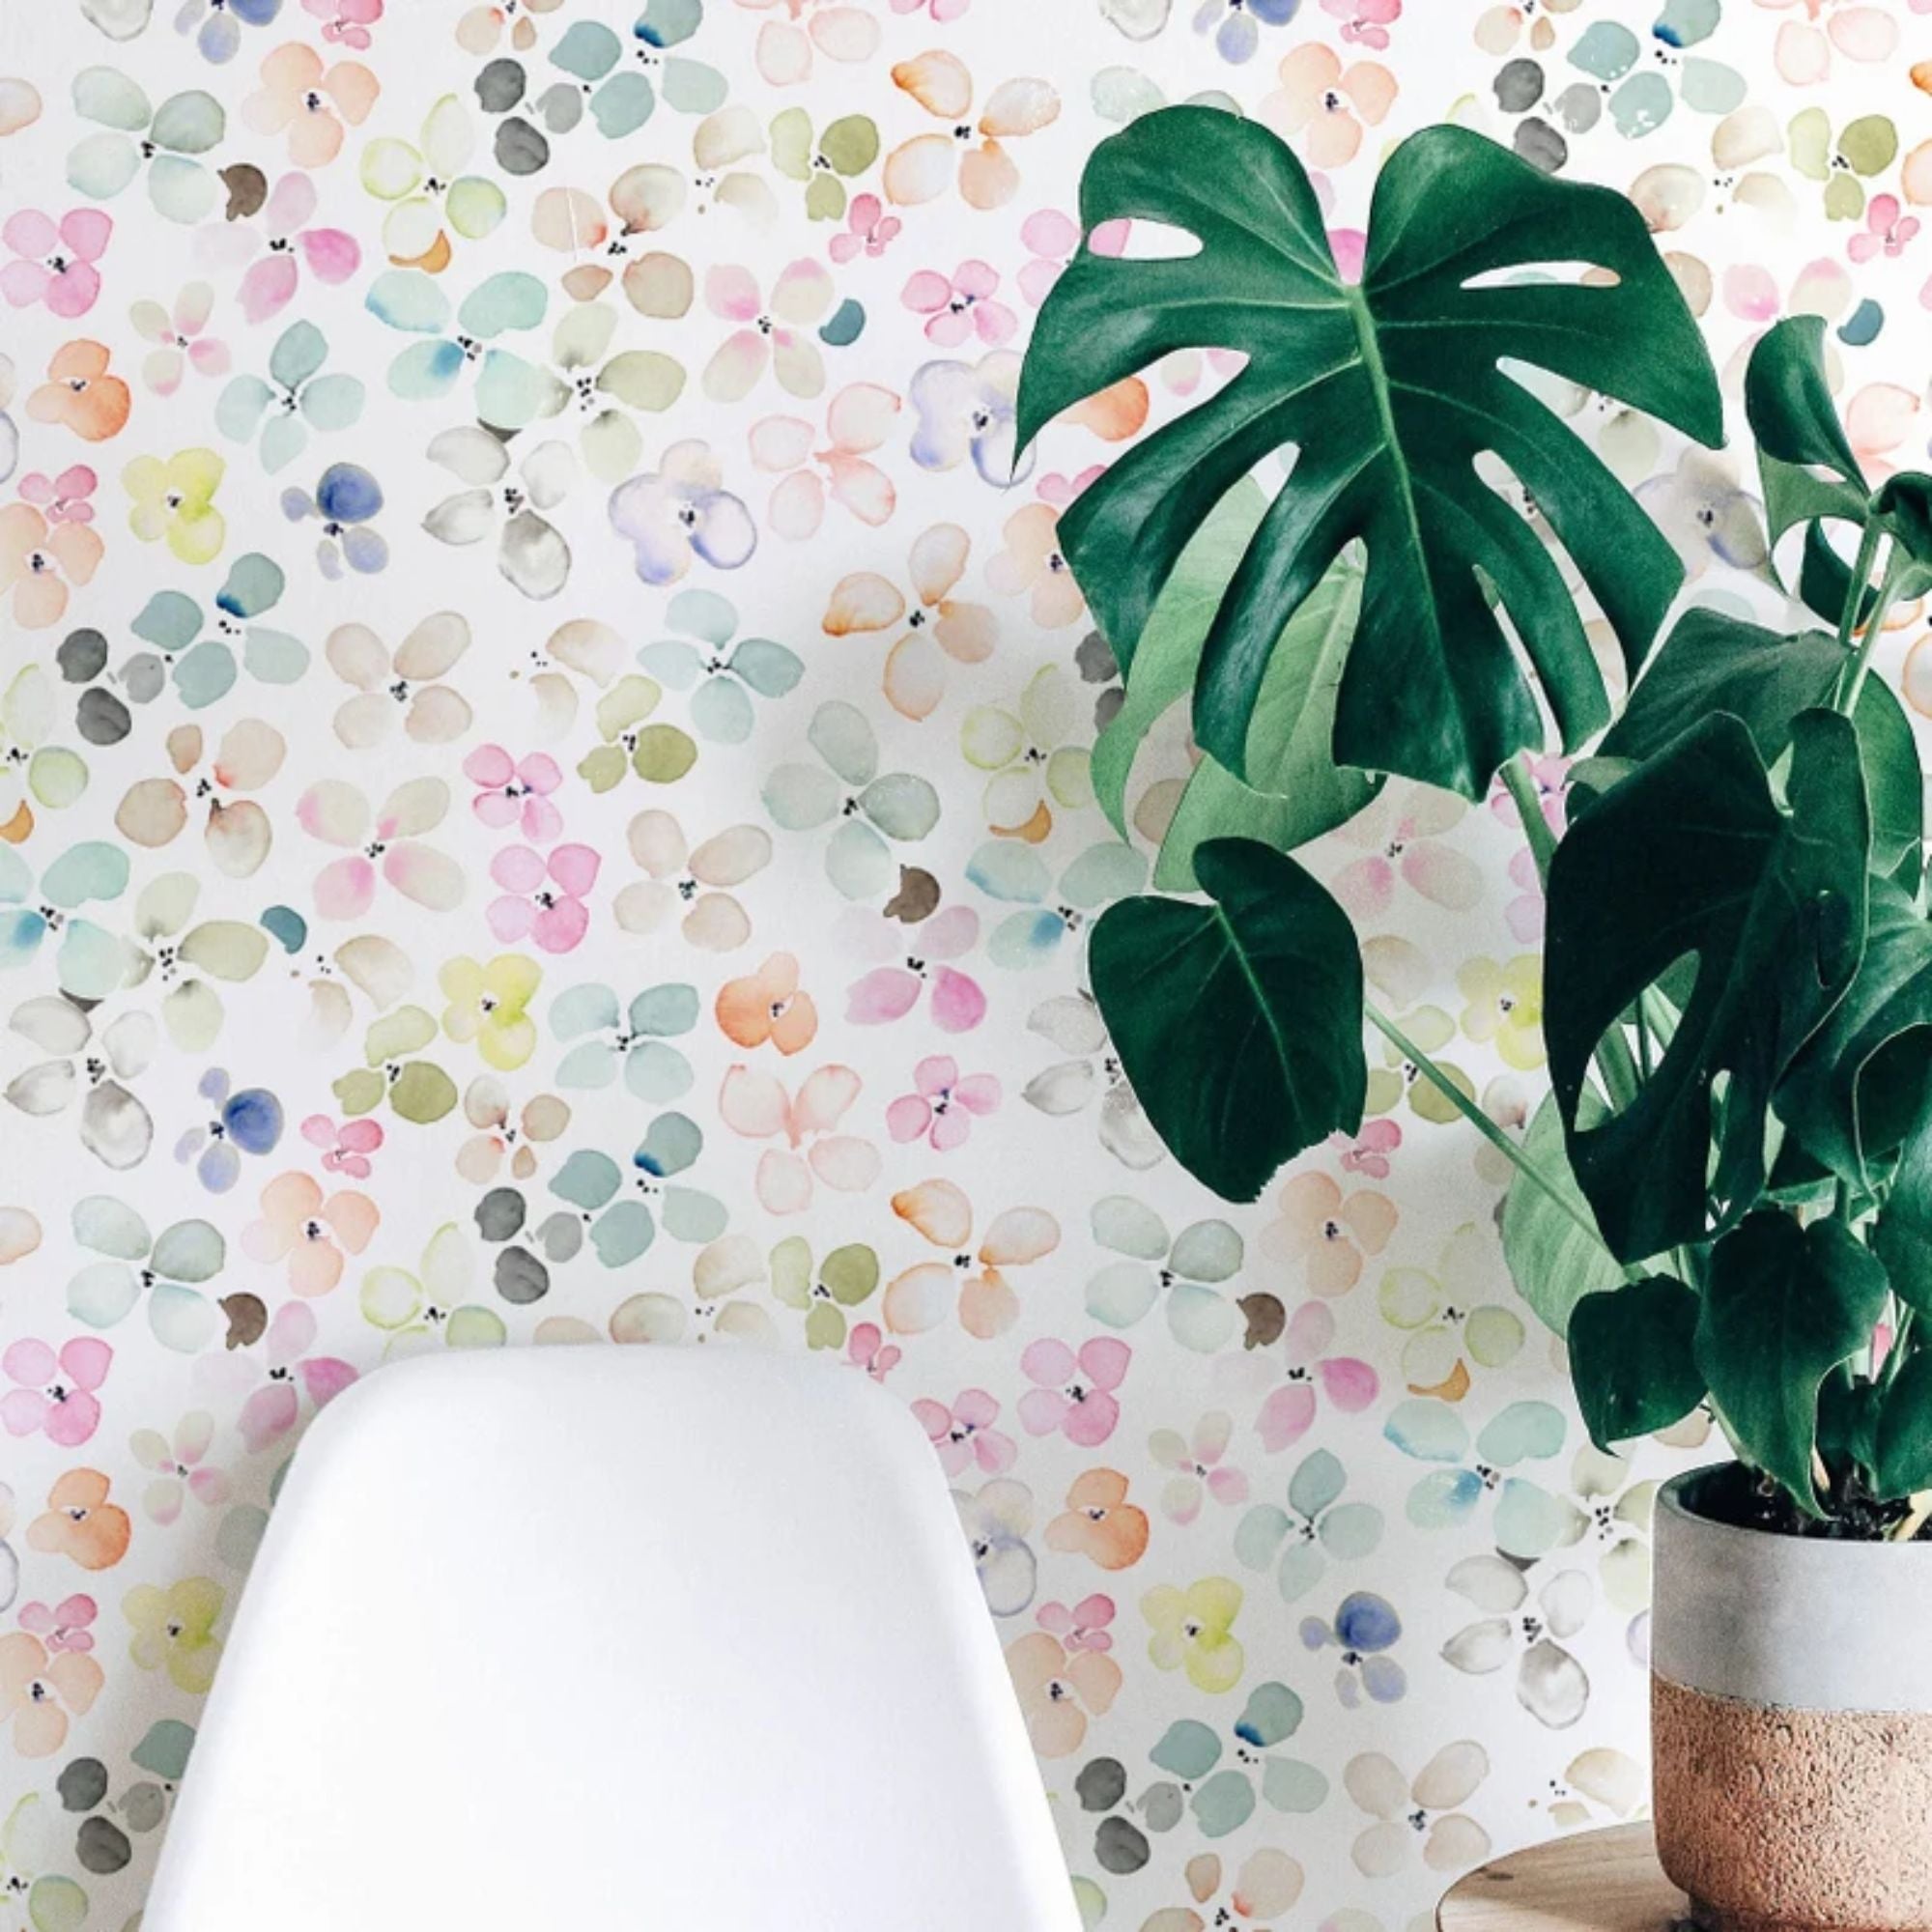 A contemporary corner of a room is brightened by the Hand Painted Floral Wallpaper, accompanied by a lush monstera plant and a sleek white chair. The wallpaper's lively colors and patterns contribute to a dynamic yet peaceful environment.